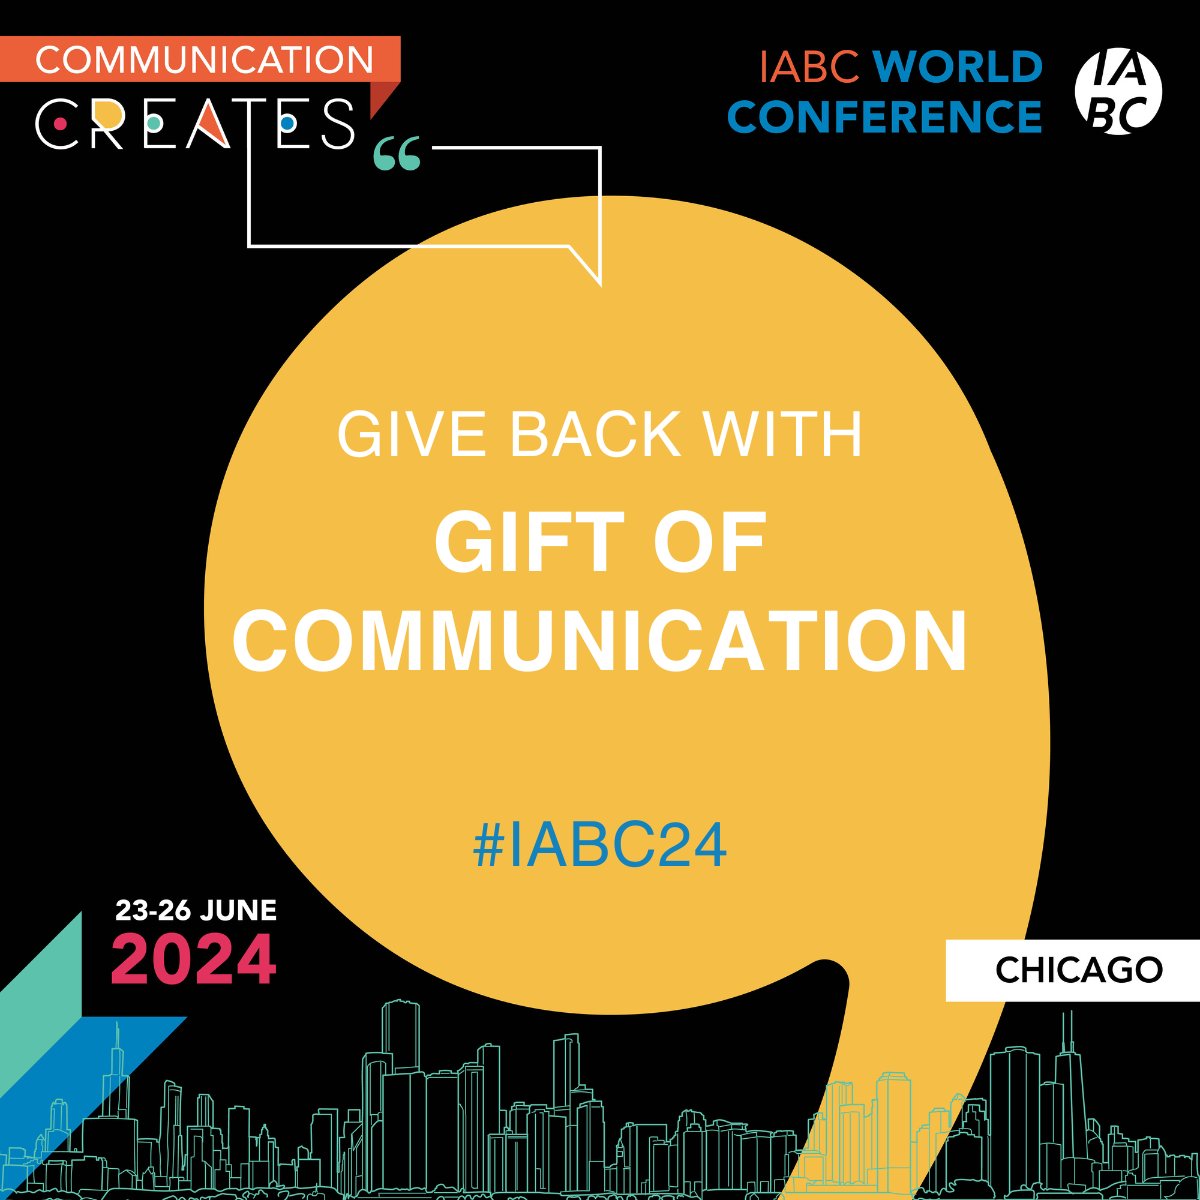 You can still sign up for the #IABC24 Gift of Communication! Empower Chicago-area community charities and truly make a difference to kick off your World Conference experience: hubs.li/Q02wQDcH0 #GiftofCommunication #IABCFoundation